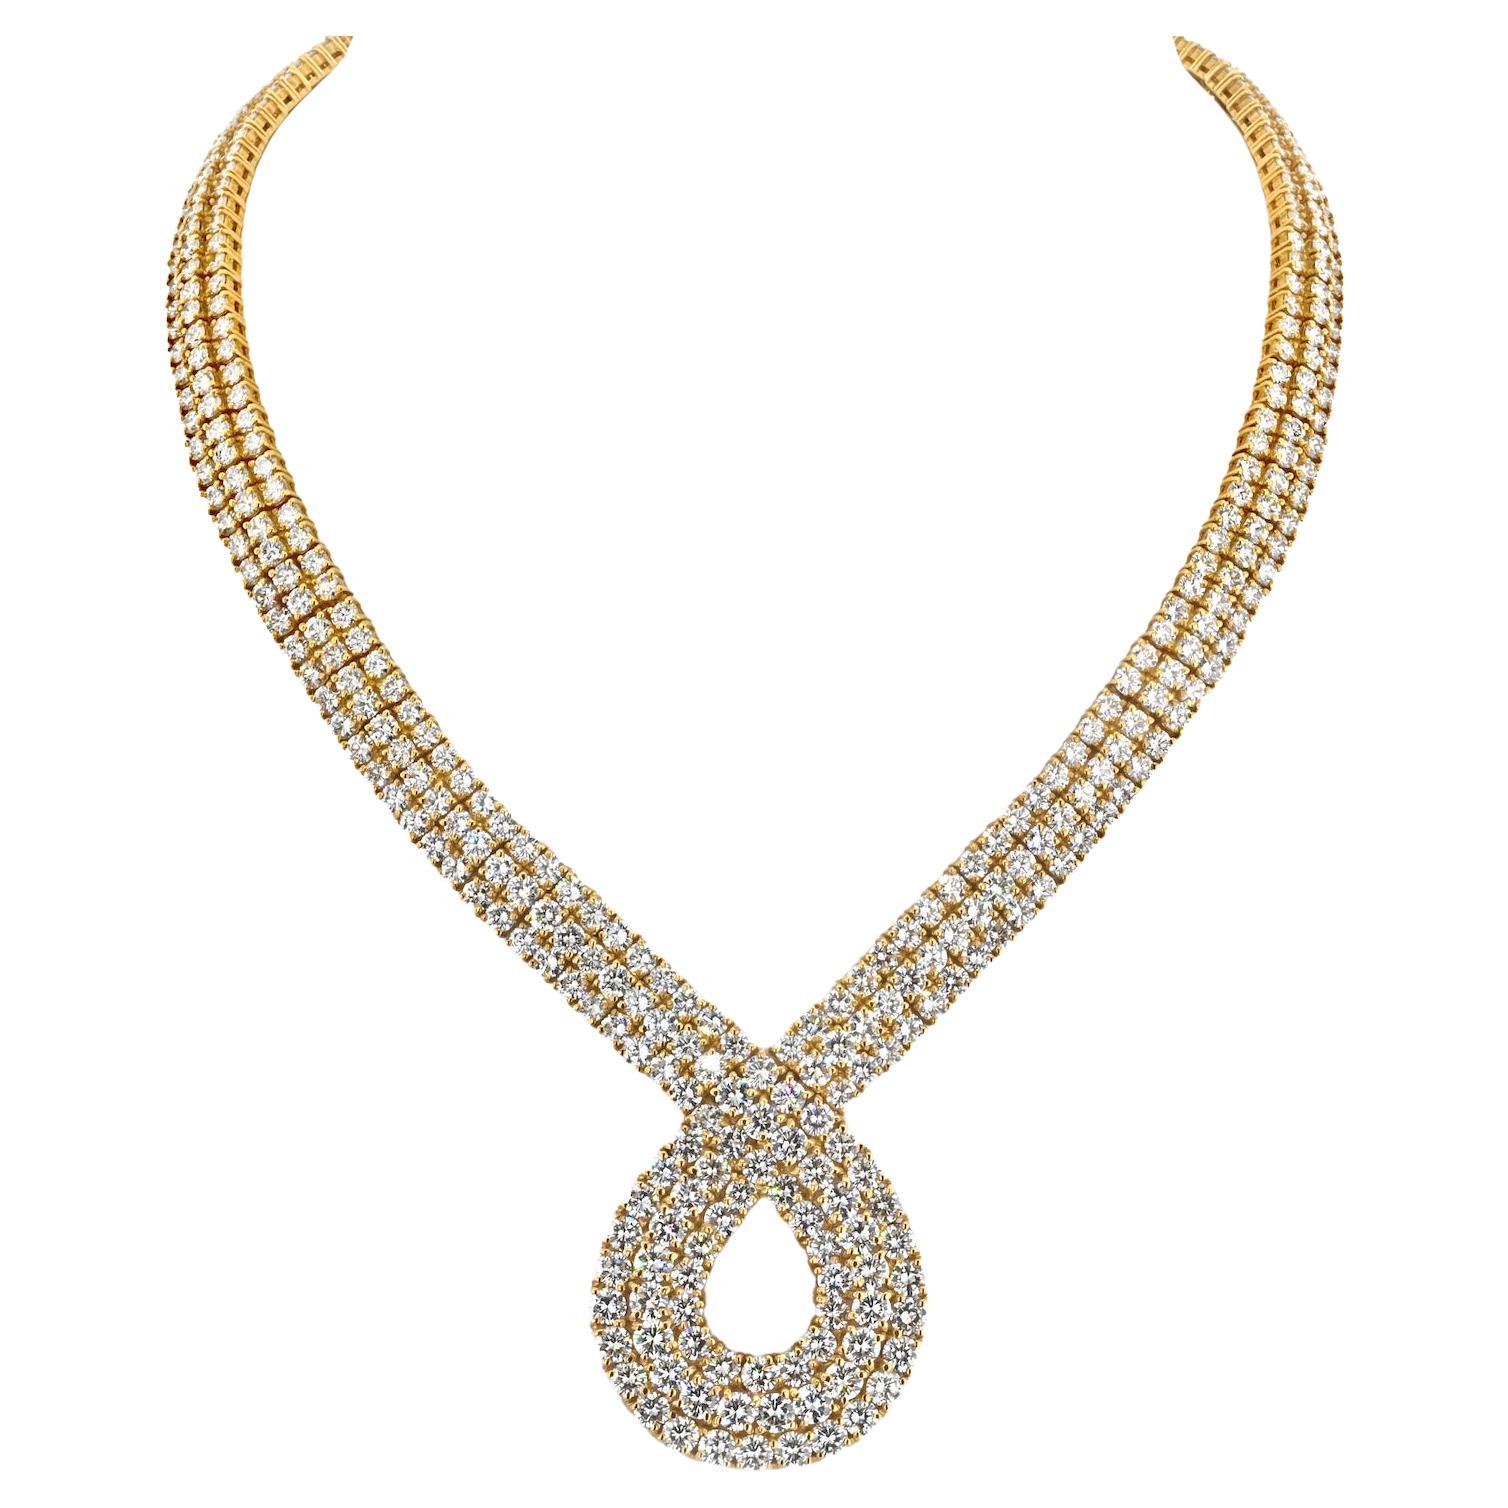 18K Yellow Gold Scrolling At The Front 48.00cttw Diamond Necklace